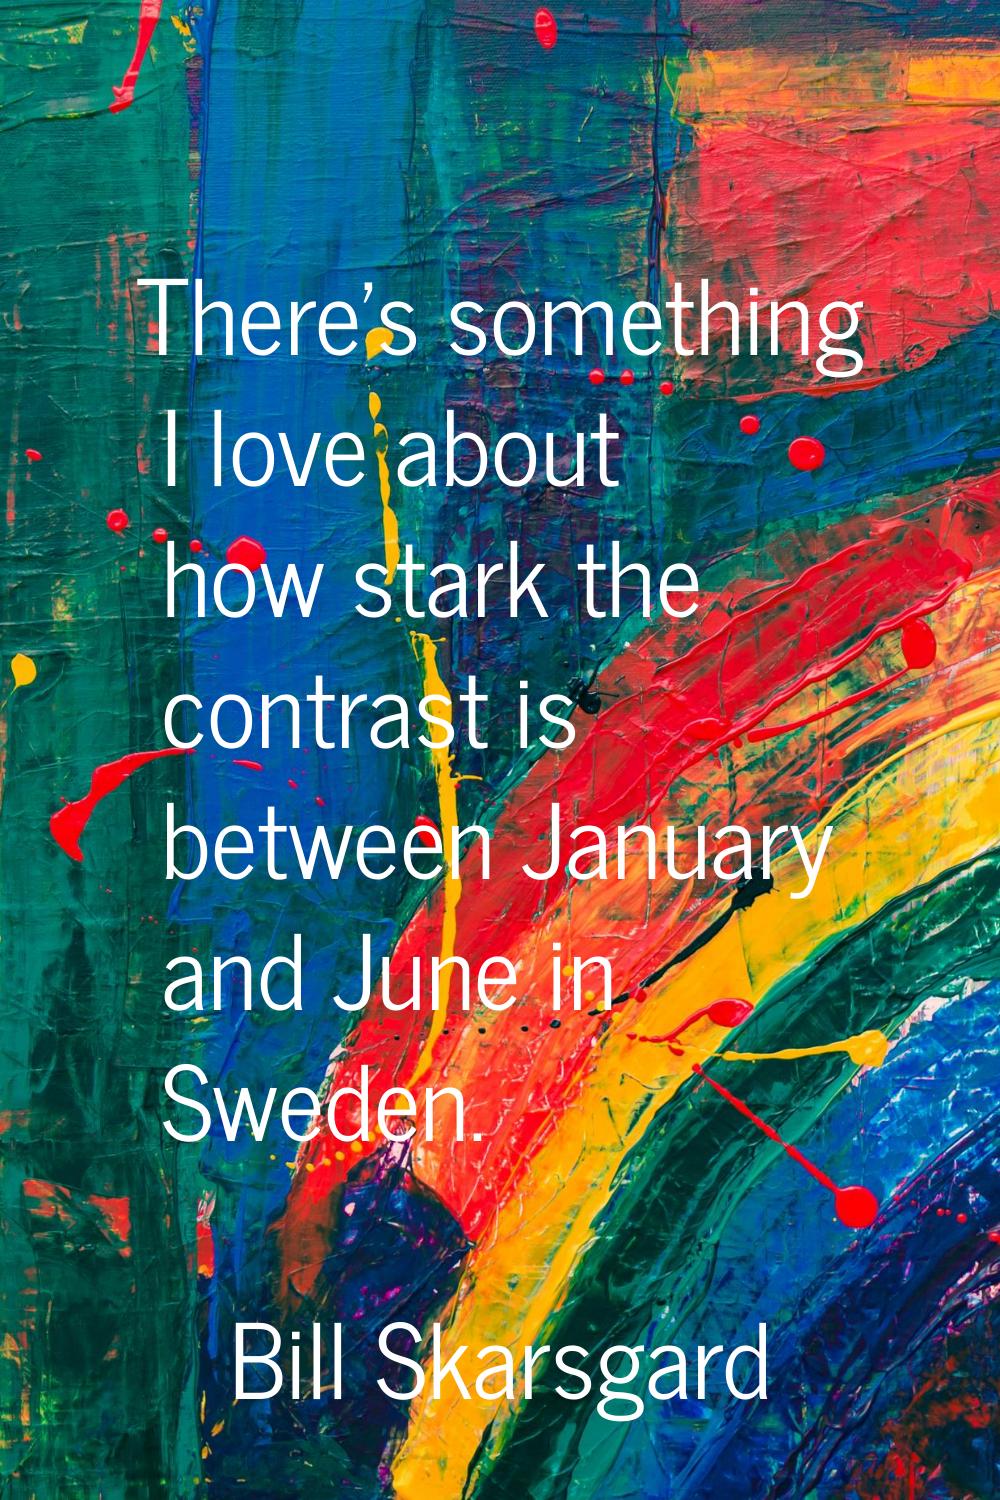 There's something I love about how stark the contrast is between January and June in Sweden.